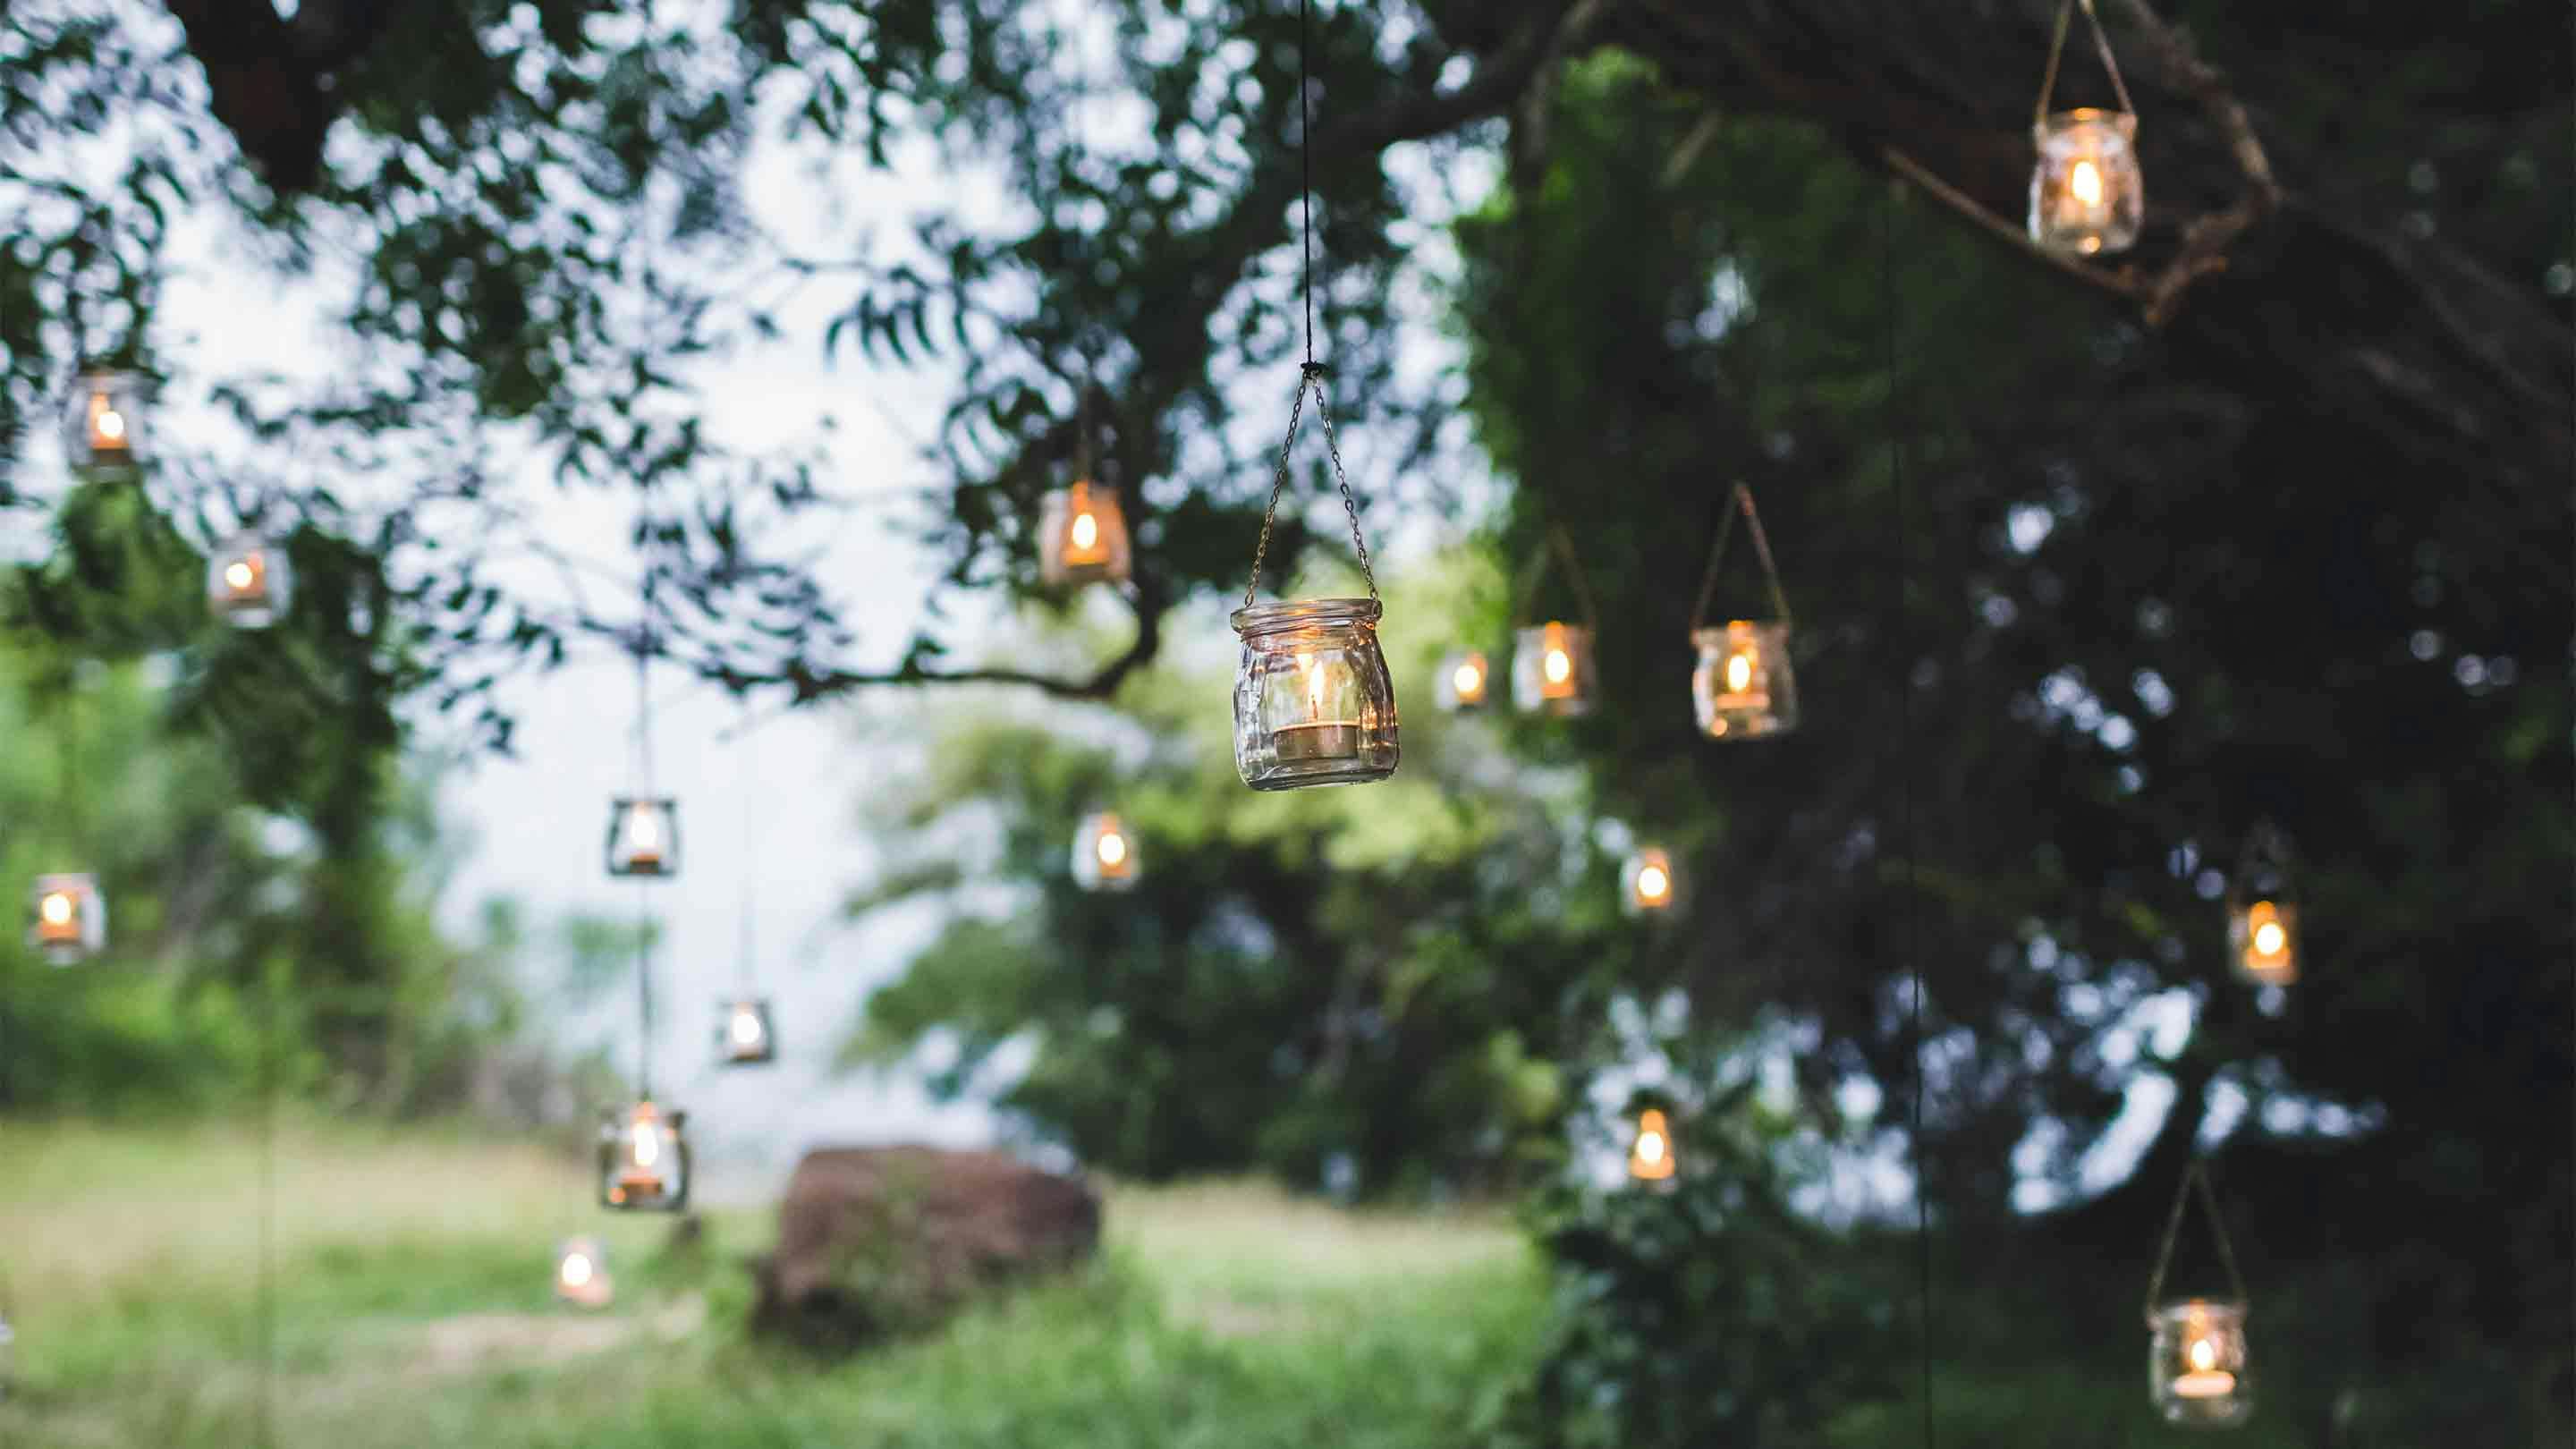 Hanging candles on a tree in summer.